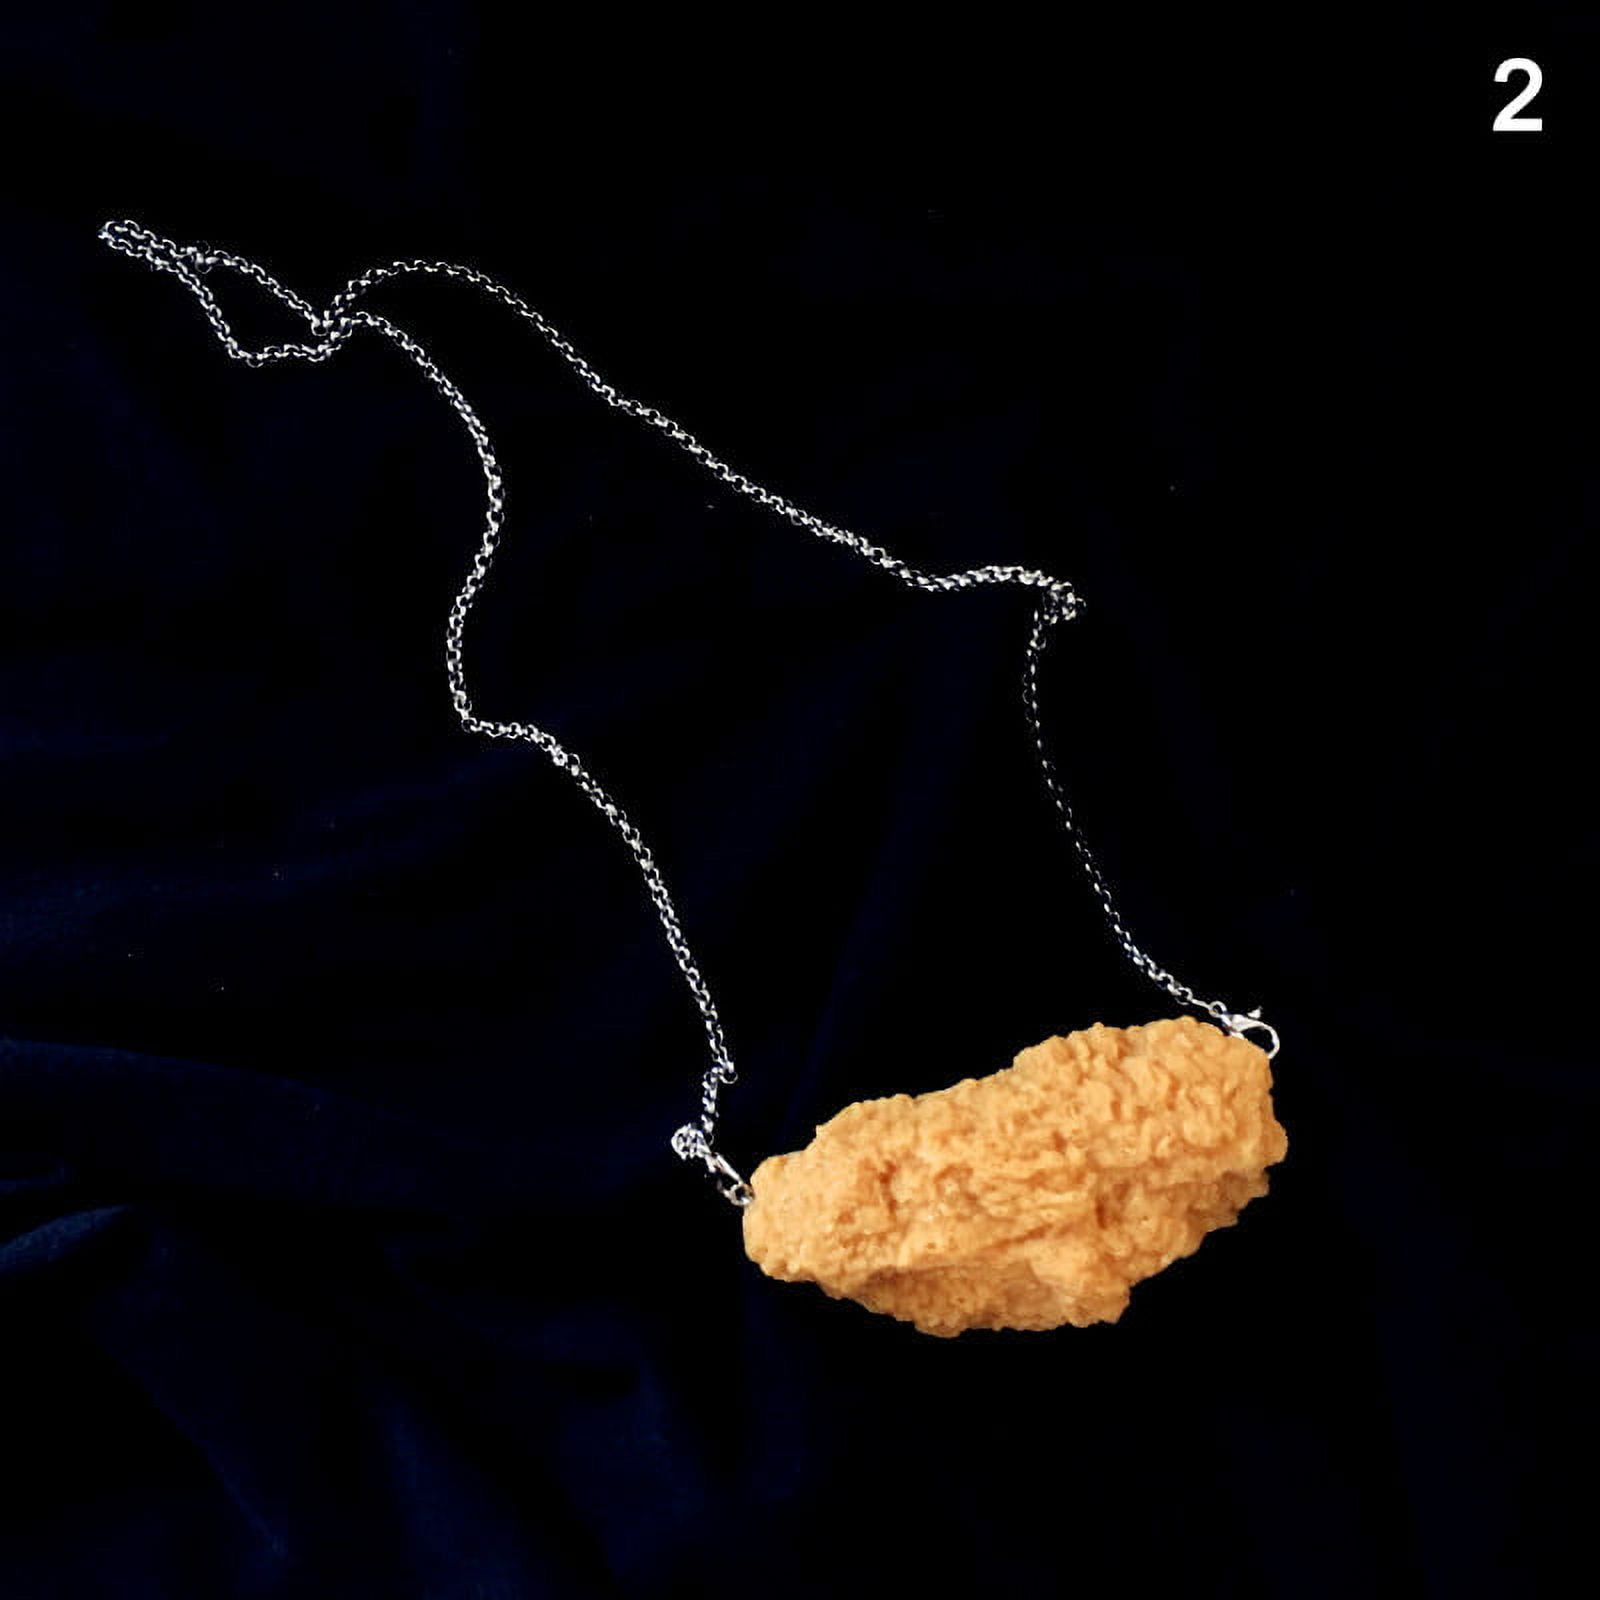 Hand Made Fried Chicken Thigh Chicken Wings Necklace Simulation Skewer Necklace 2 Fried Chicken Wings fada3814 43bf 472f 9503 164427006a0a.ca466c83154a0f81e08bfaa0cf75560e